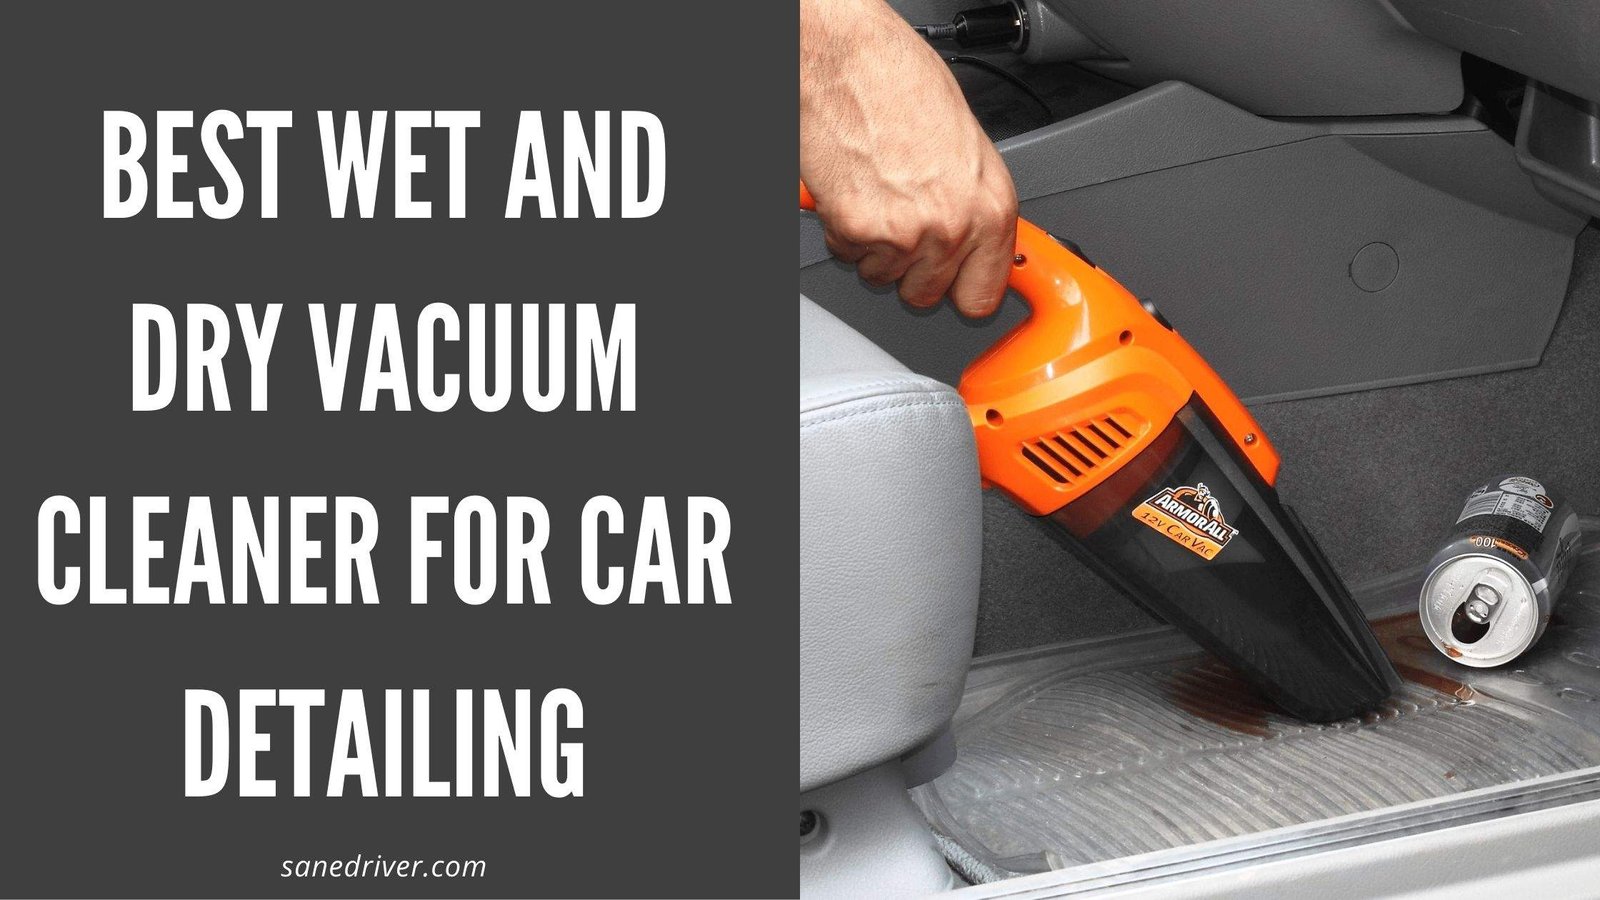 Best Wet and Dry Vacuum Cleaner for Car Detailing